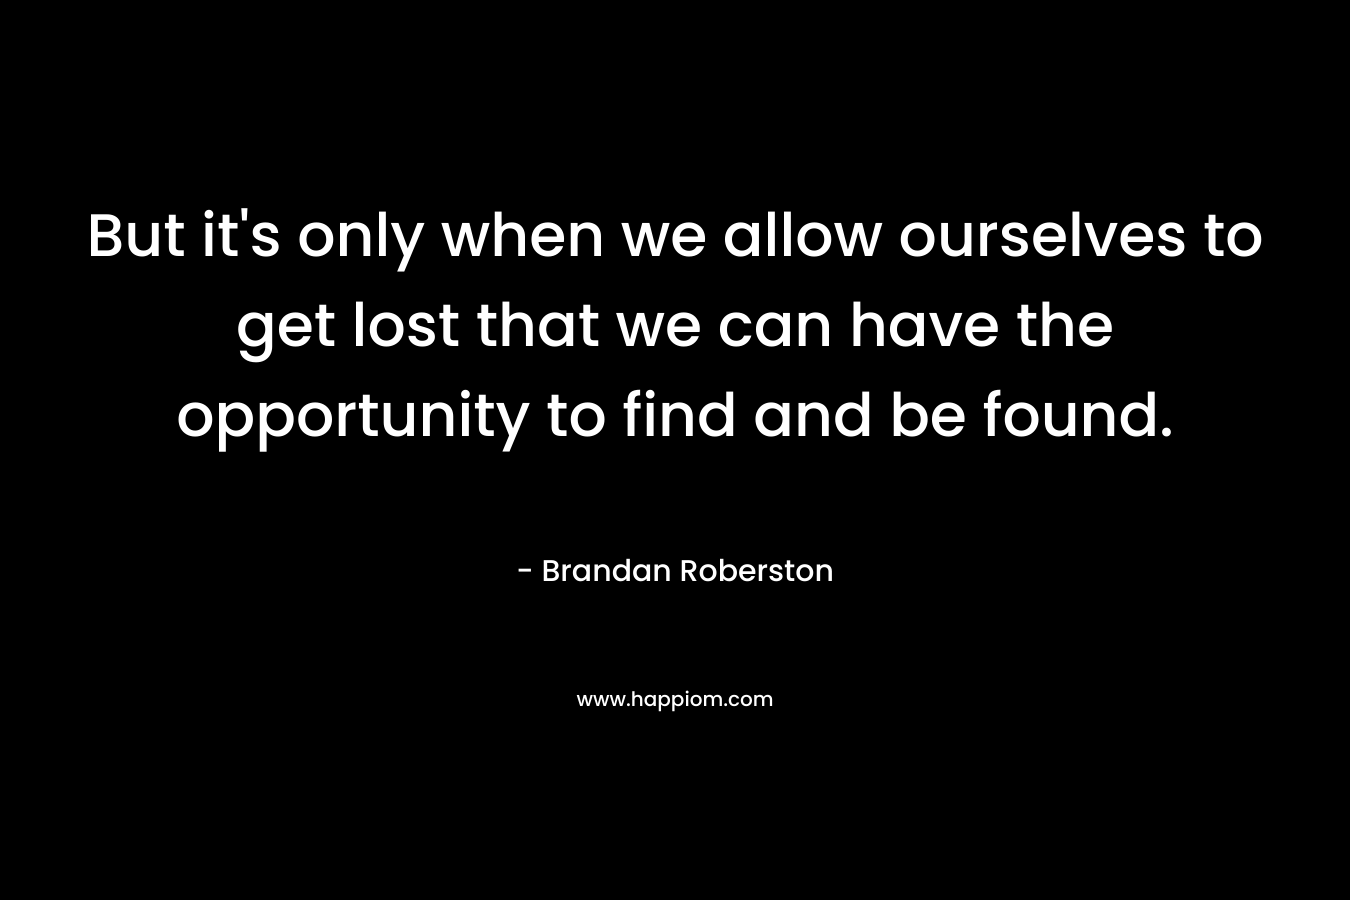 But it's only when we allow ourselves to get lost that we can have the opportunity to find and be found.